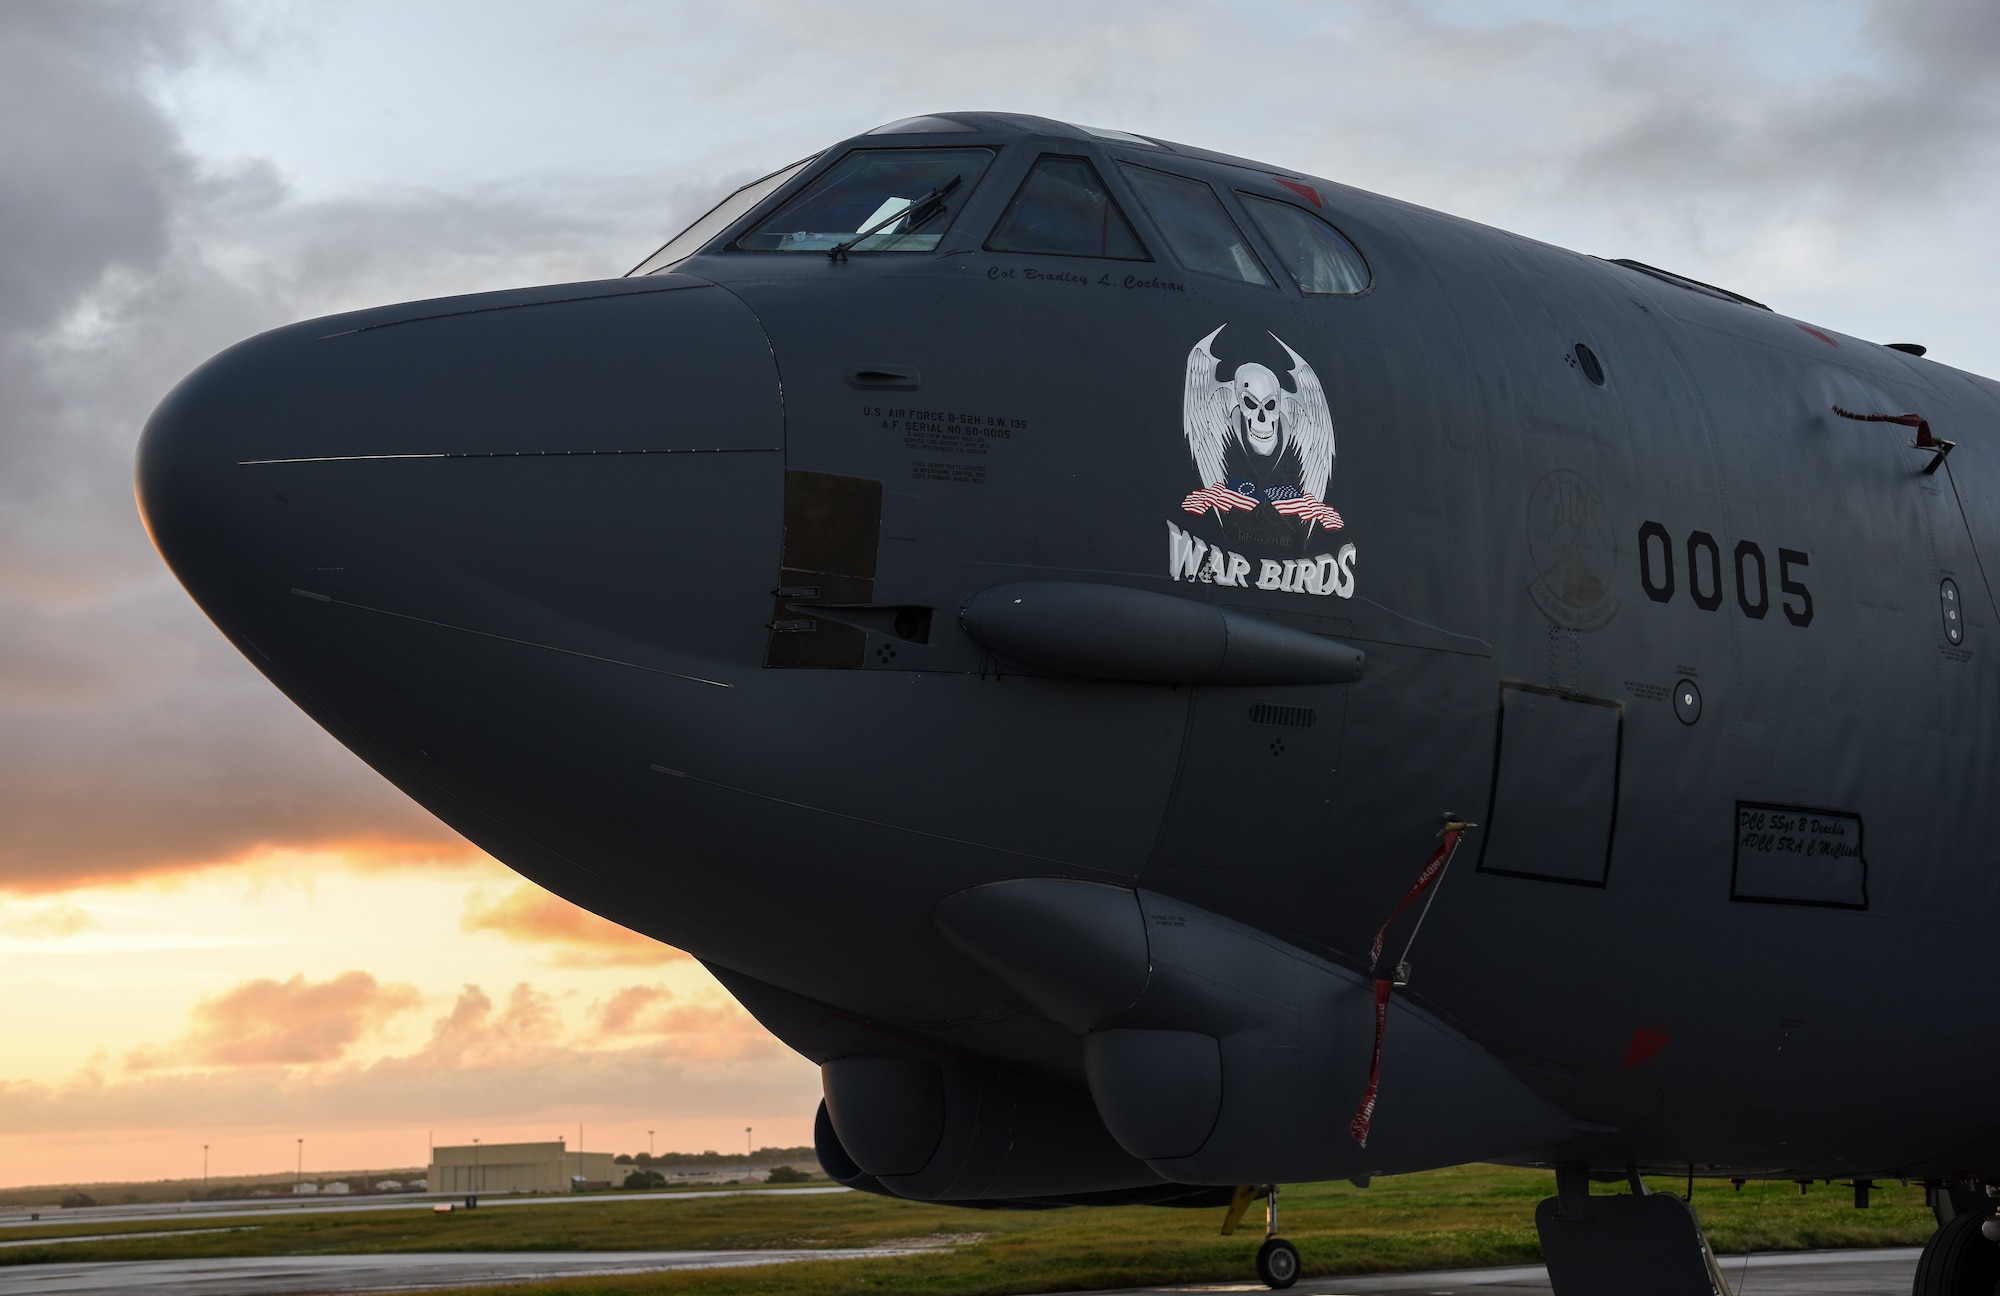 A B-52 Stratofortress bomber from the 5th Bomb Wing at Minot Air Force Base (AFB), North Dakota, sits on the flightline at Andersen AFB, Guam, Jan. 15, 2019.